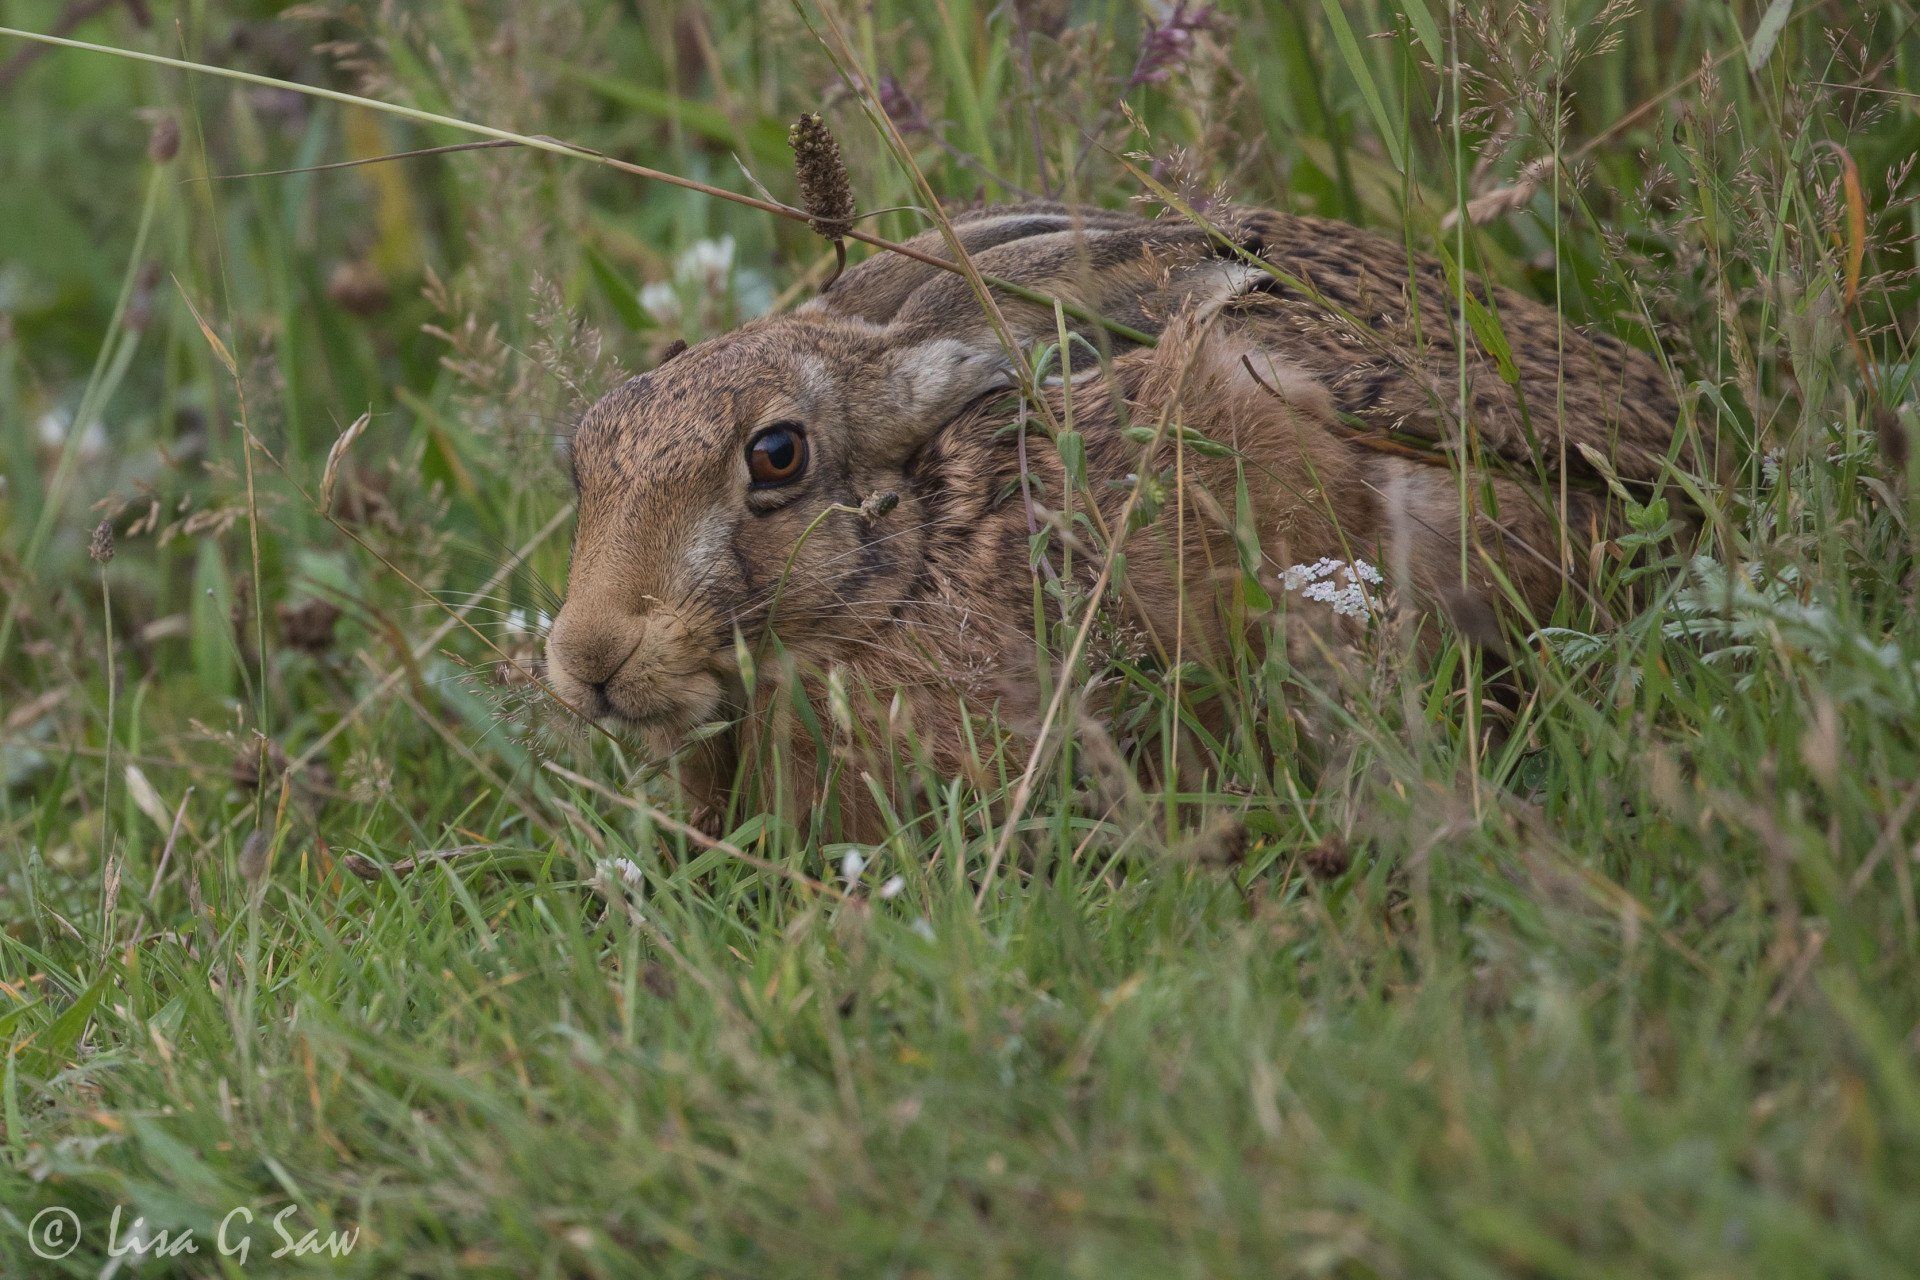 Hare hunkered down alongside path close up